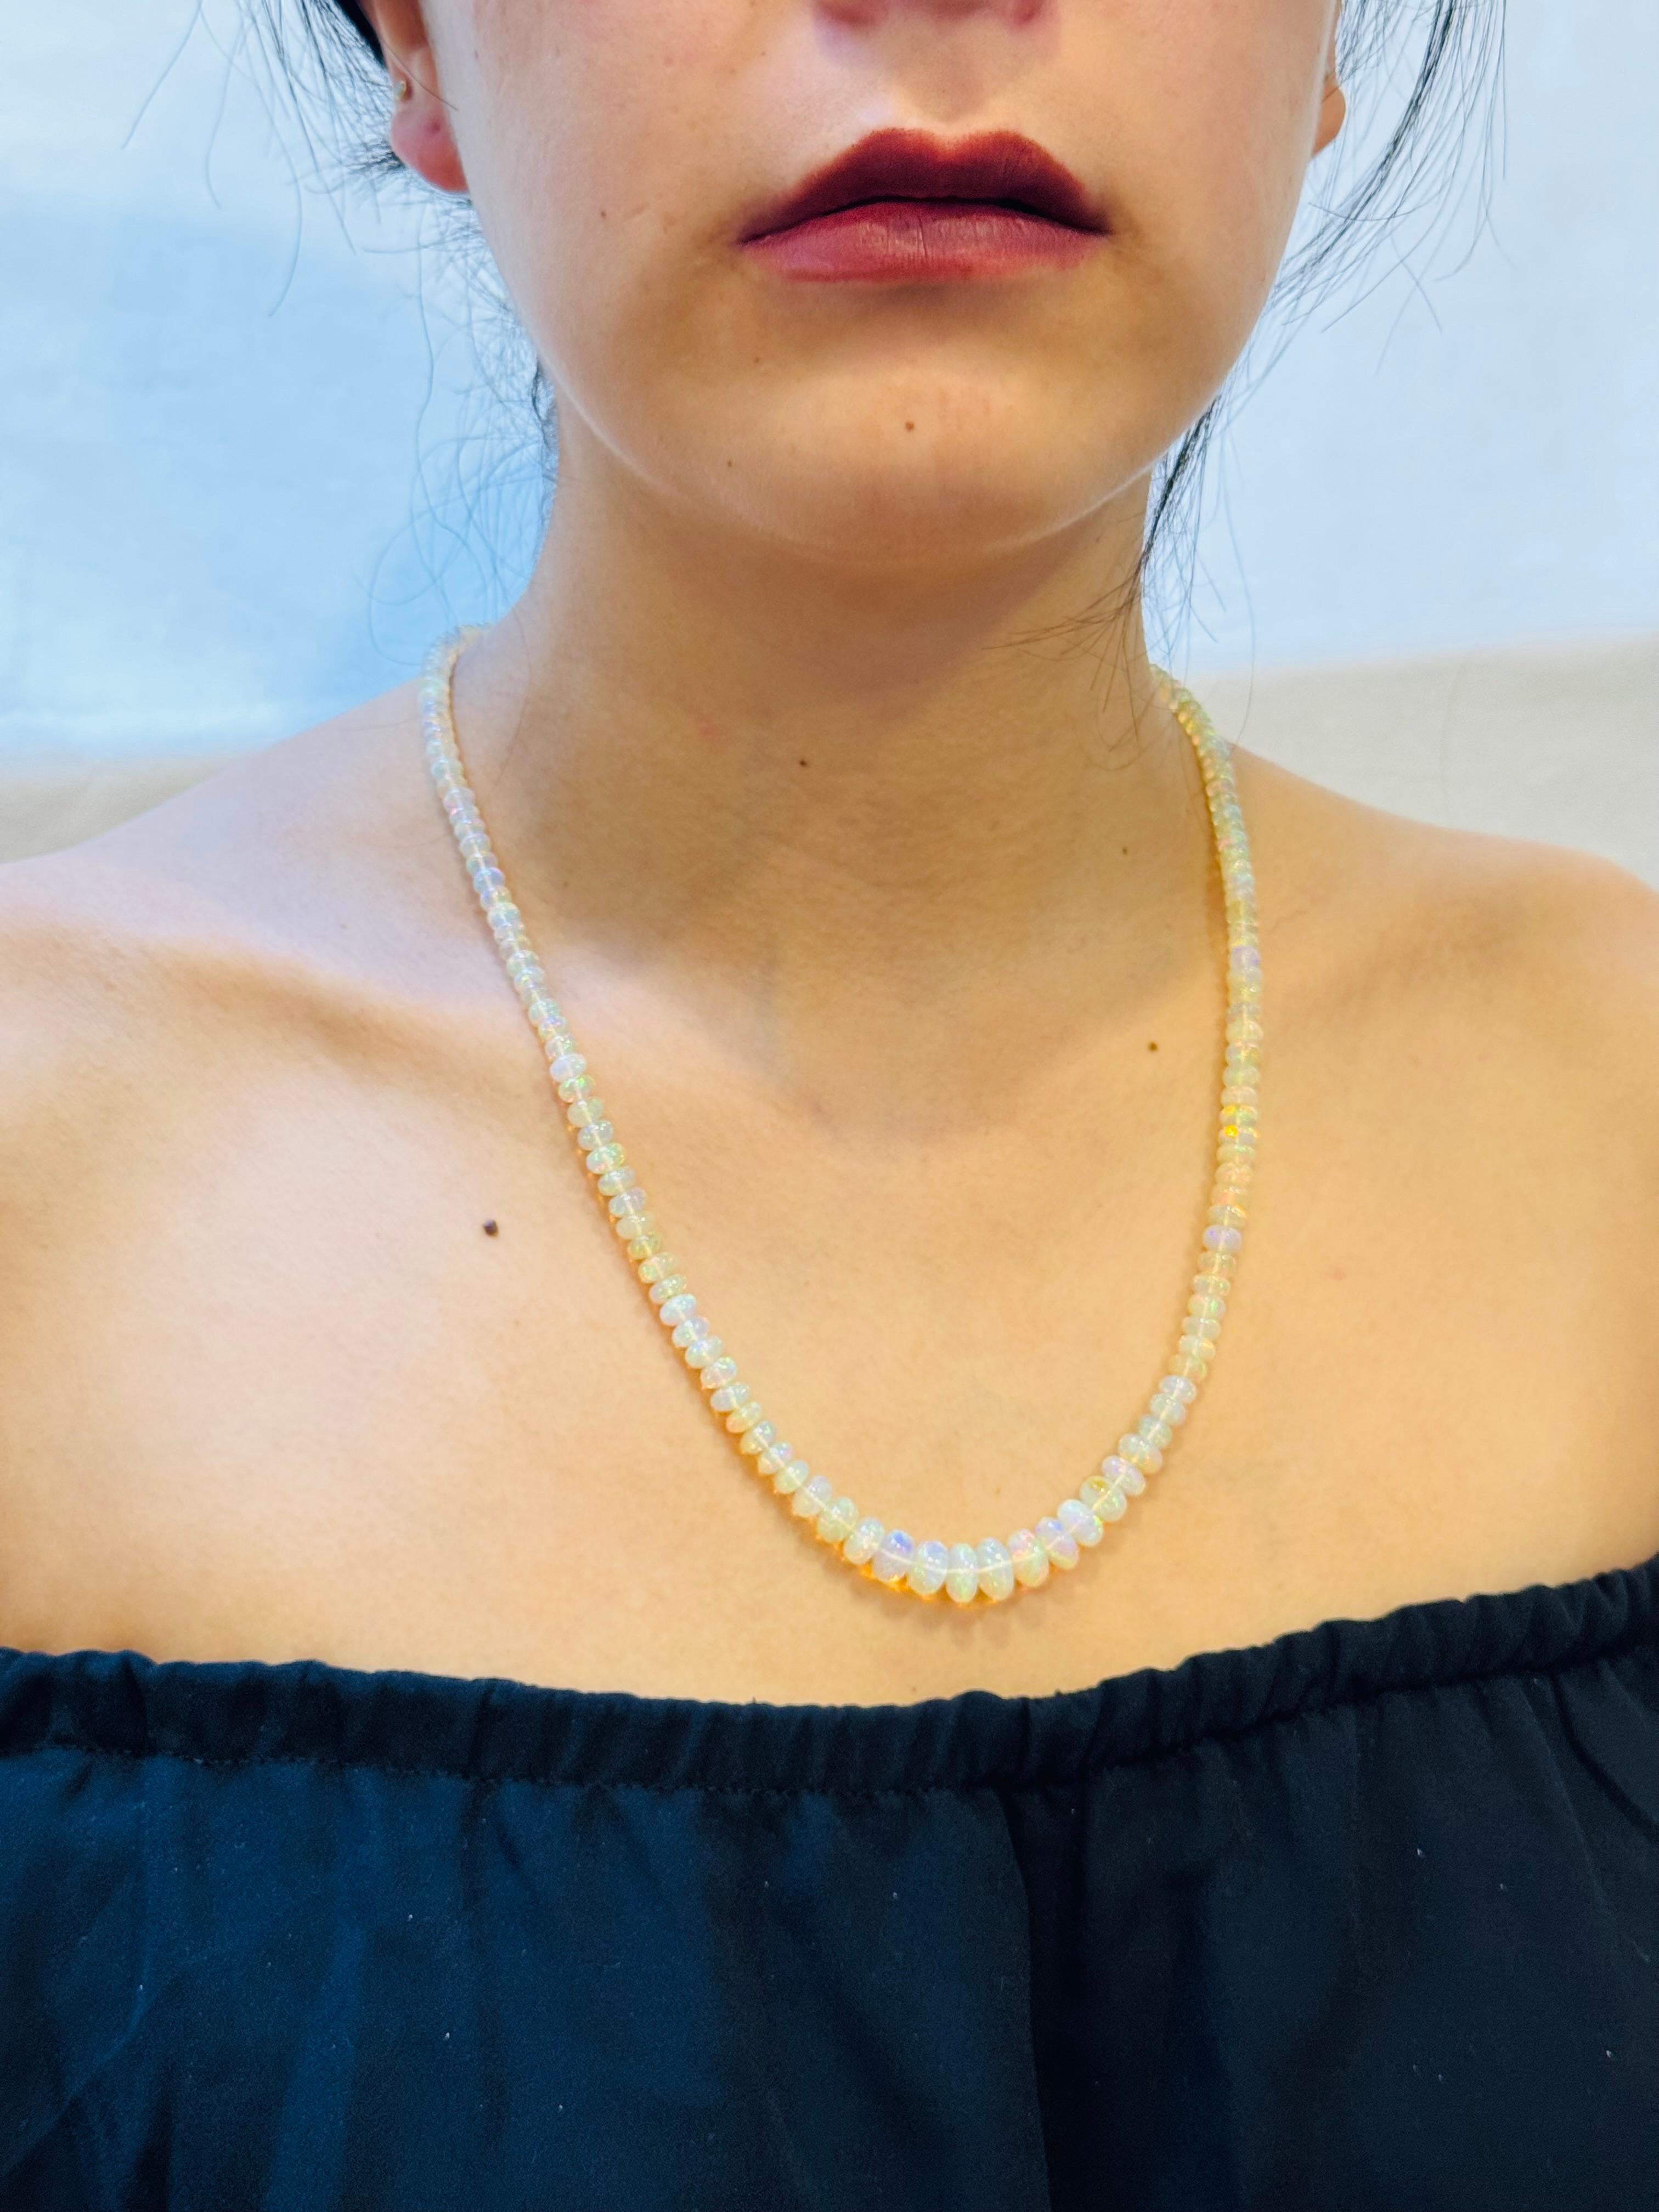 Natural 115 Ct Ethiopian Opal Bead Single Strand Necklace 14 Karat Yellow Gold For Sale 13